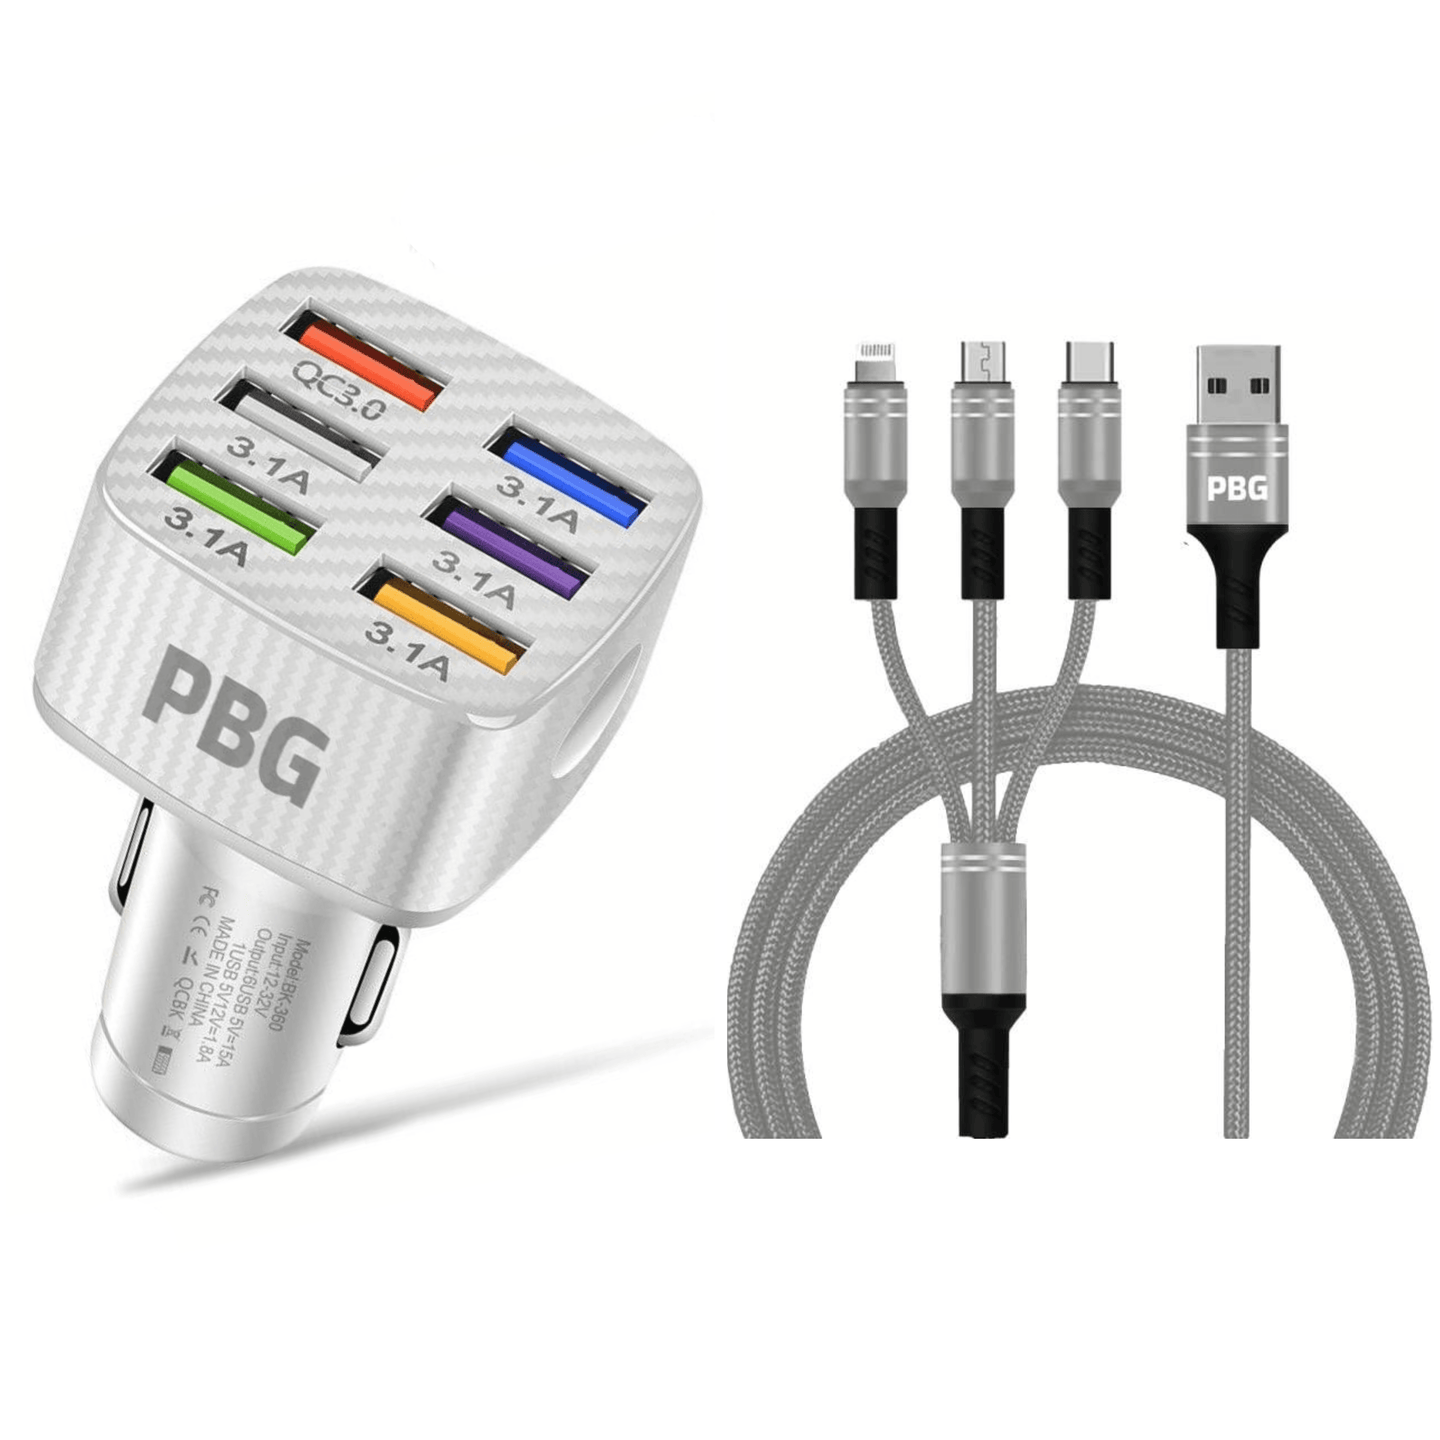 Silver charging cable 3-in-1 with durable car charger 6 port USB ports